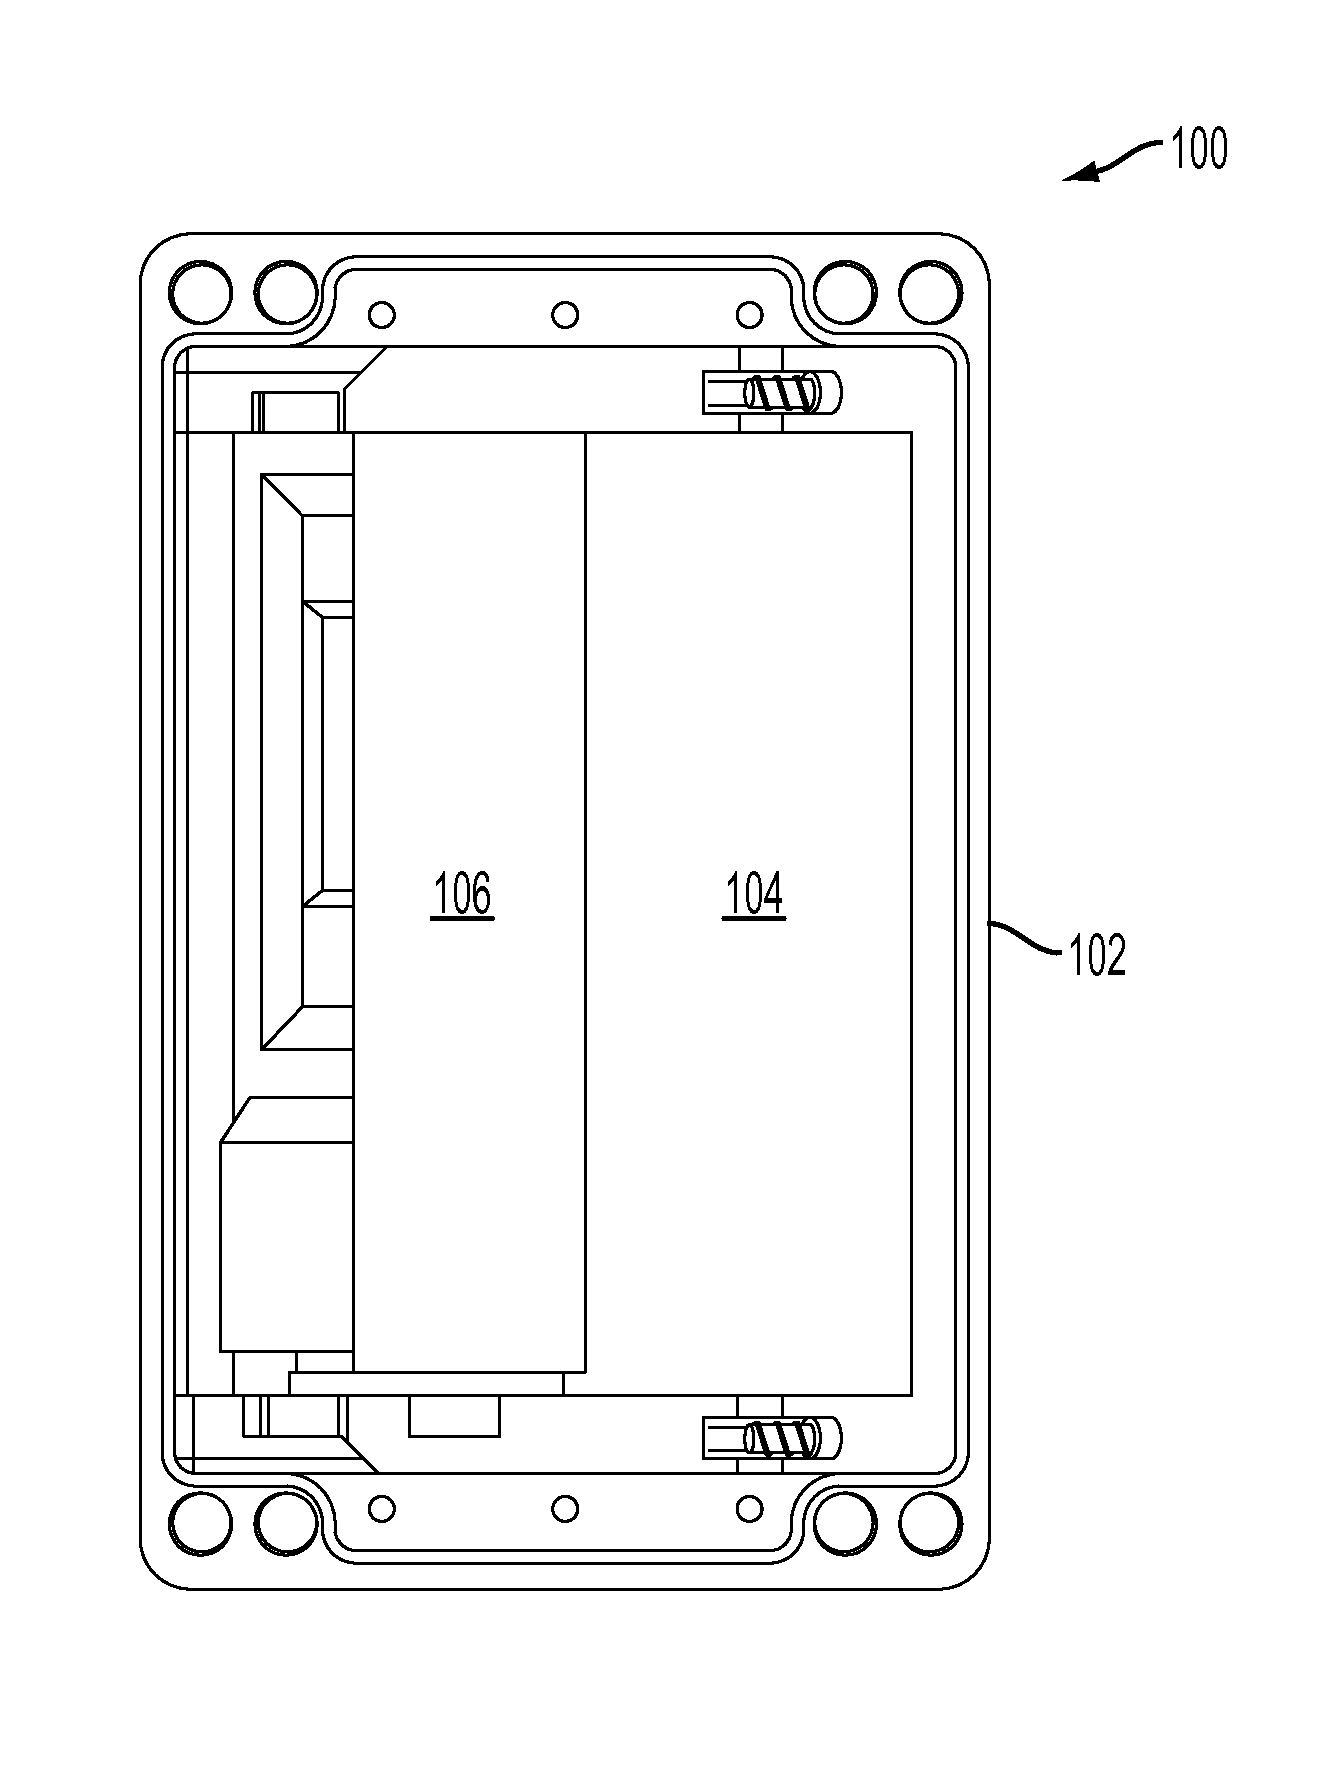 Apparatus and method to generate x-rays by contact electrification